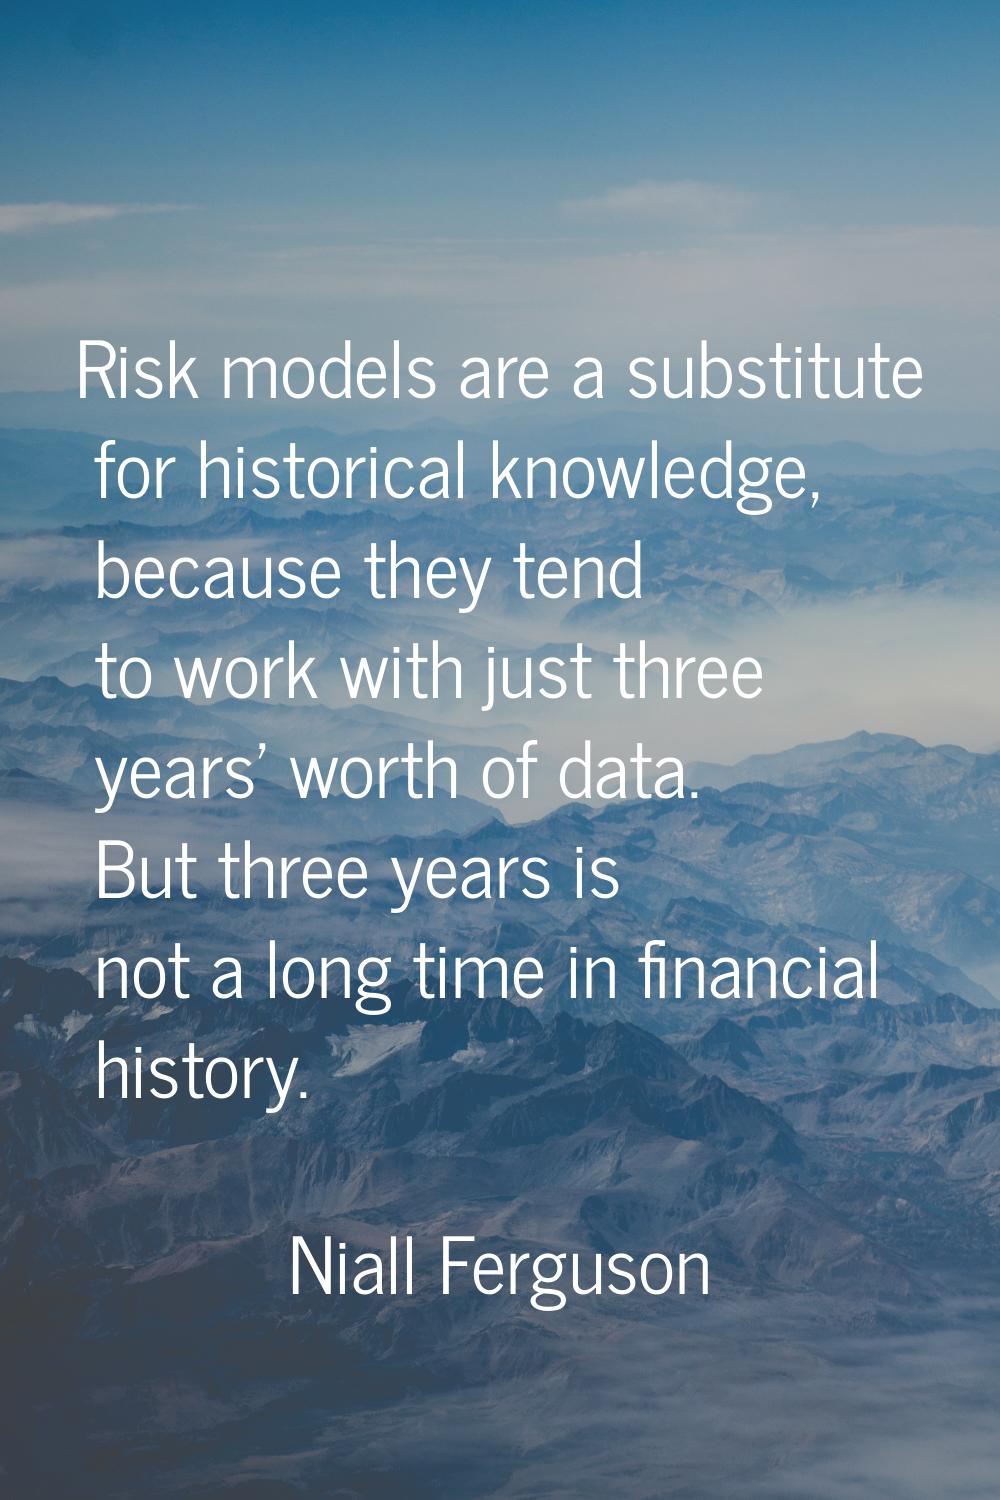 Risk models are a substitute for historical knowledge, because they tend to work with just three ye